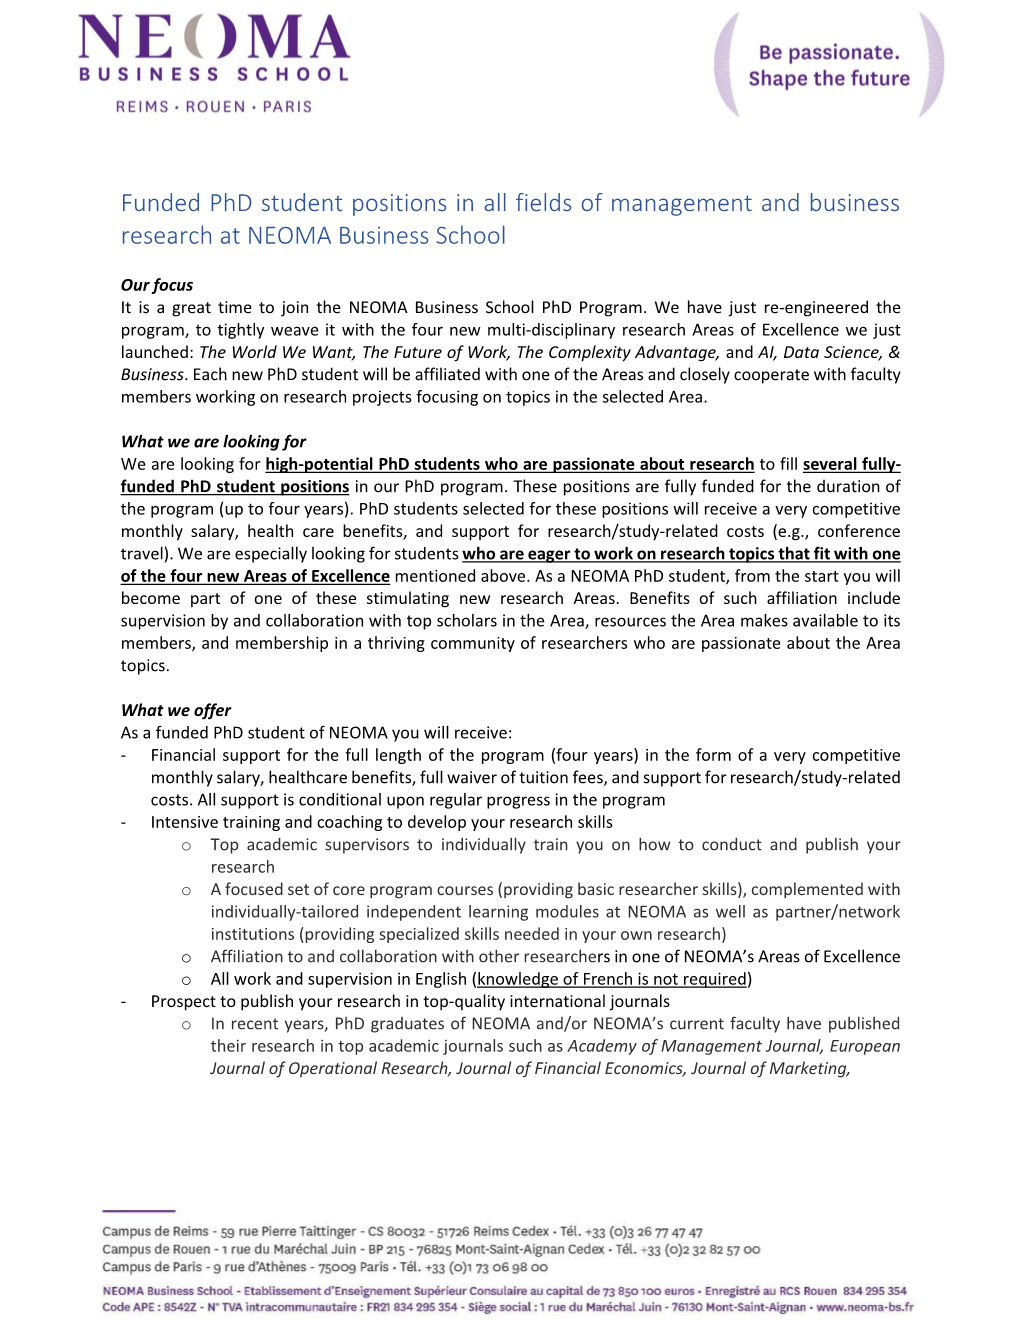 Funded Phd Student Positions in All Fields of Management and Business Research at NEOMA Business School